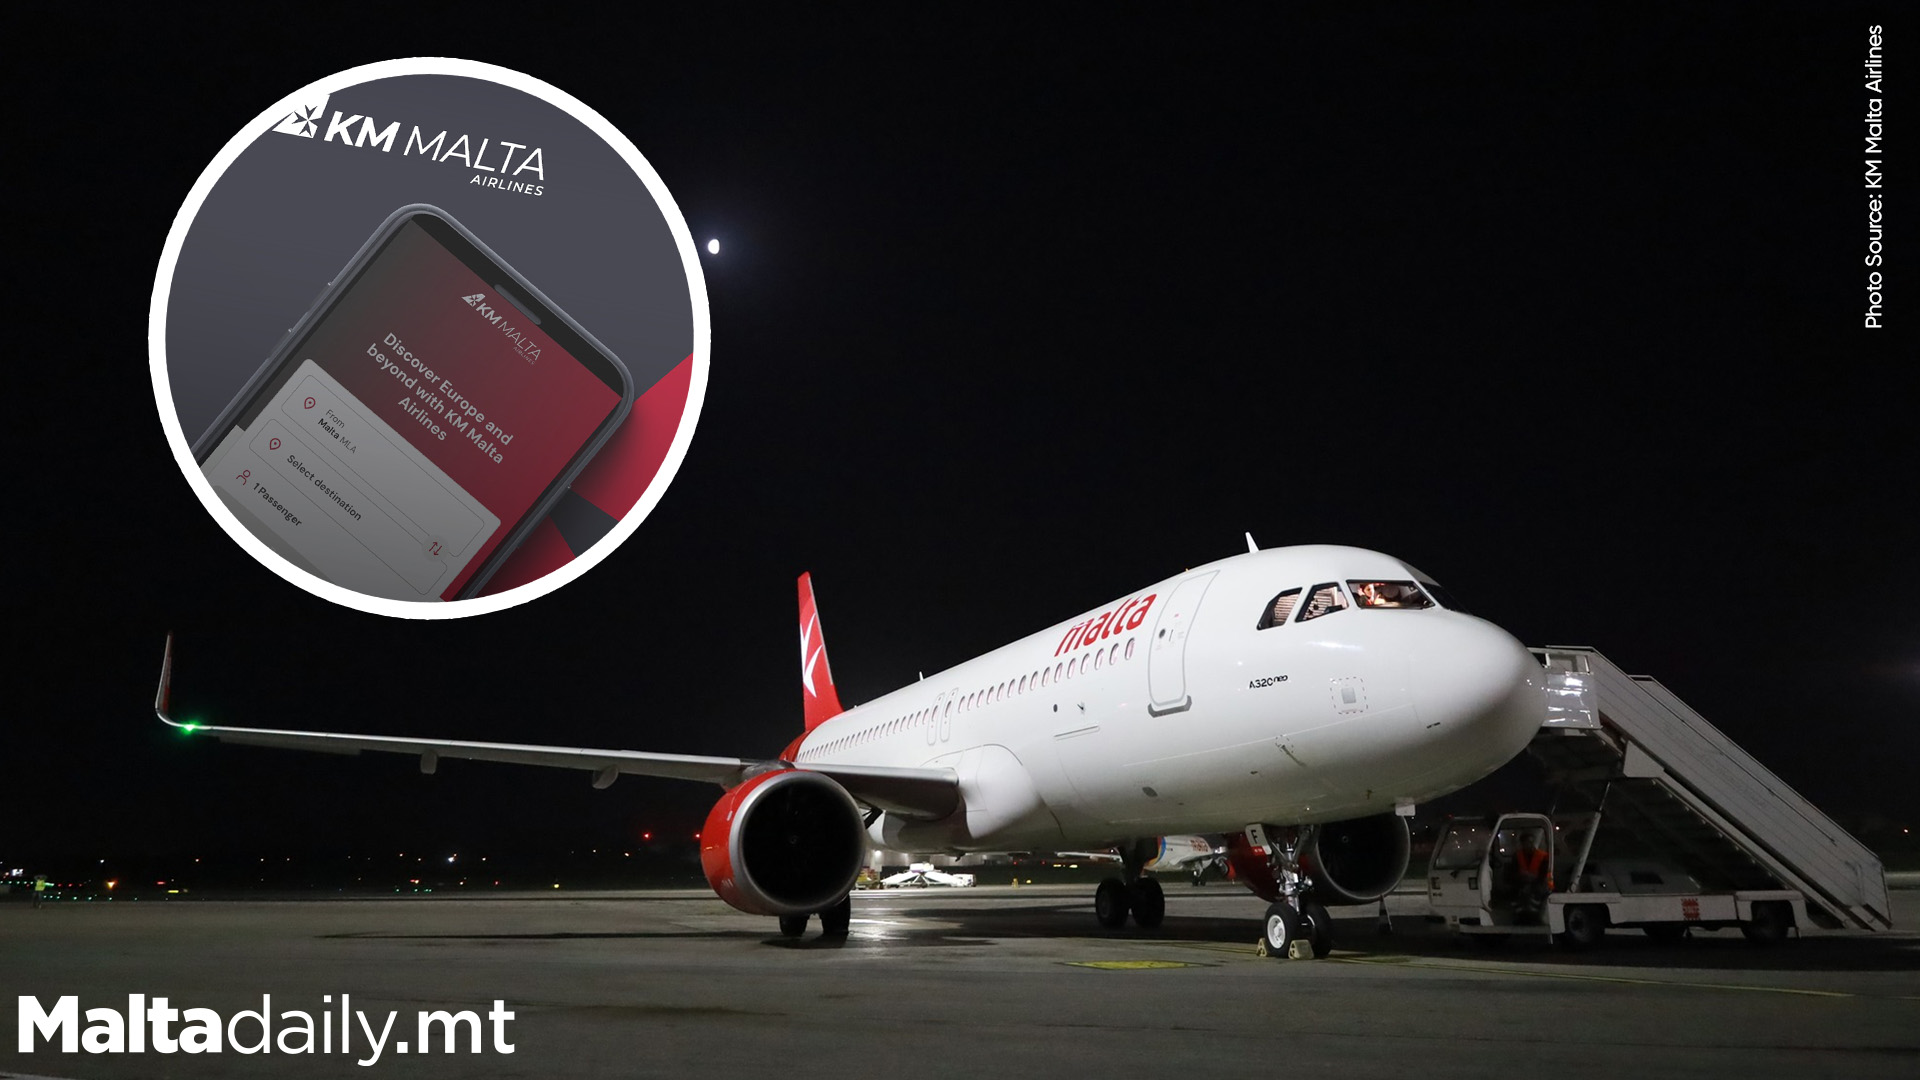 KM Malta Airlines Launches New Mobile App